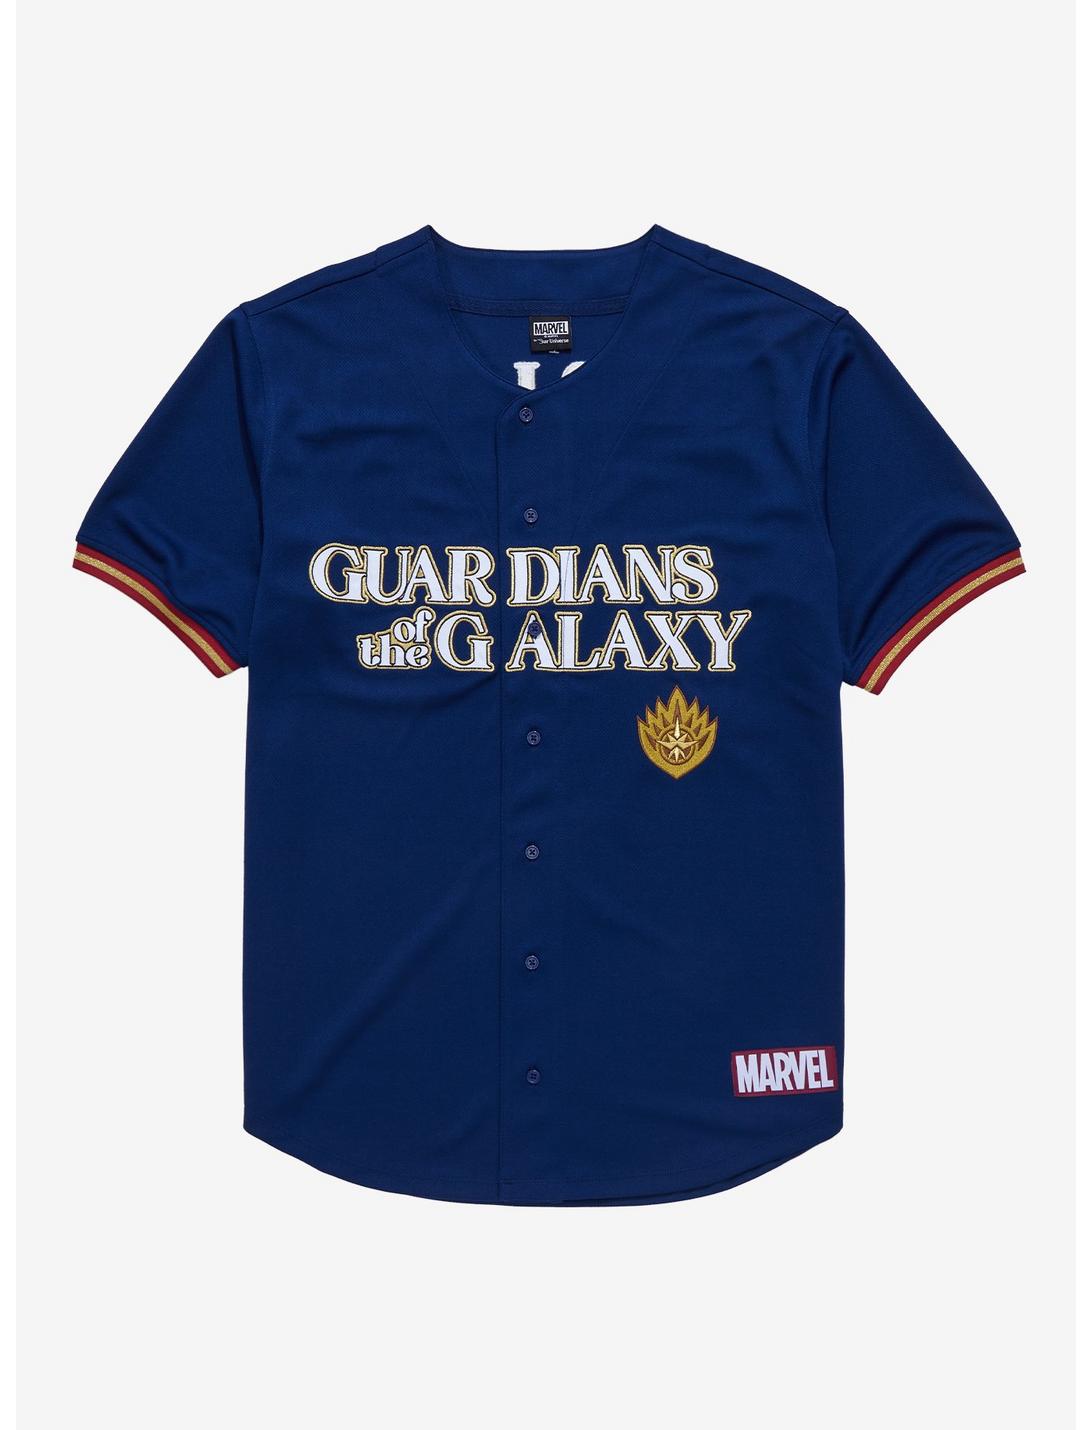 Marvel Guardians of the Galaxy Star-Lord Baseball Jersey - BoxLunch Exclusive , NAVY, hi-res